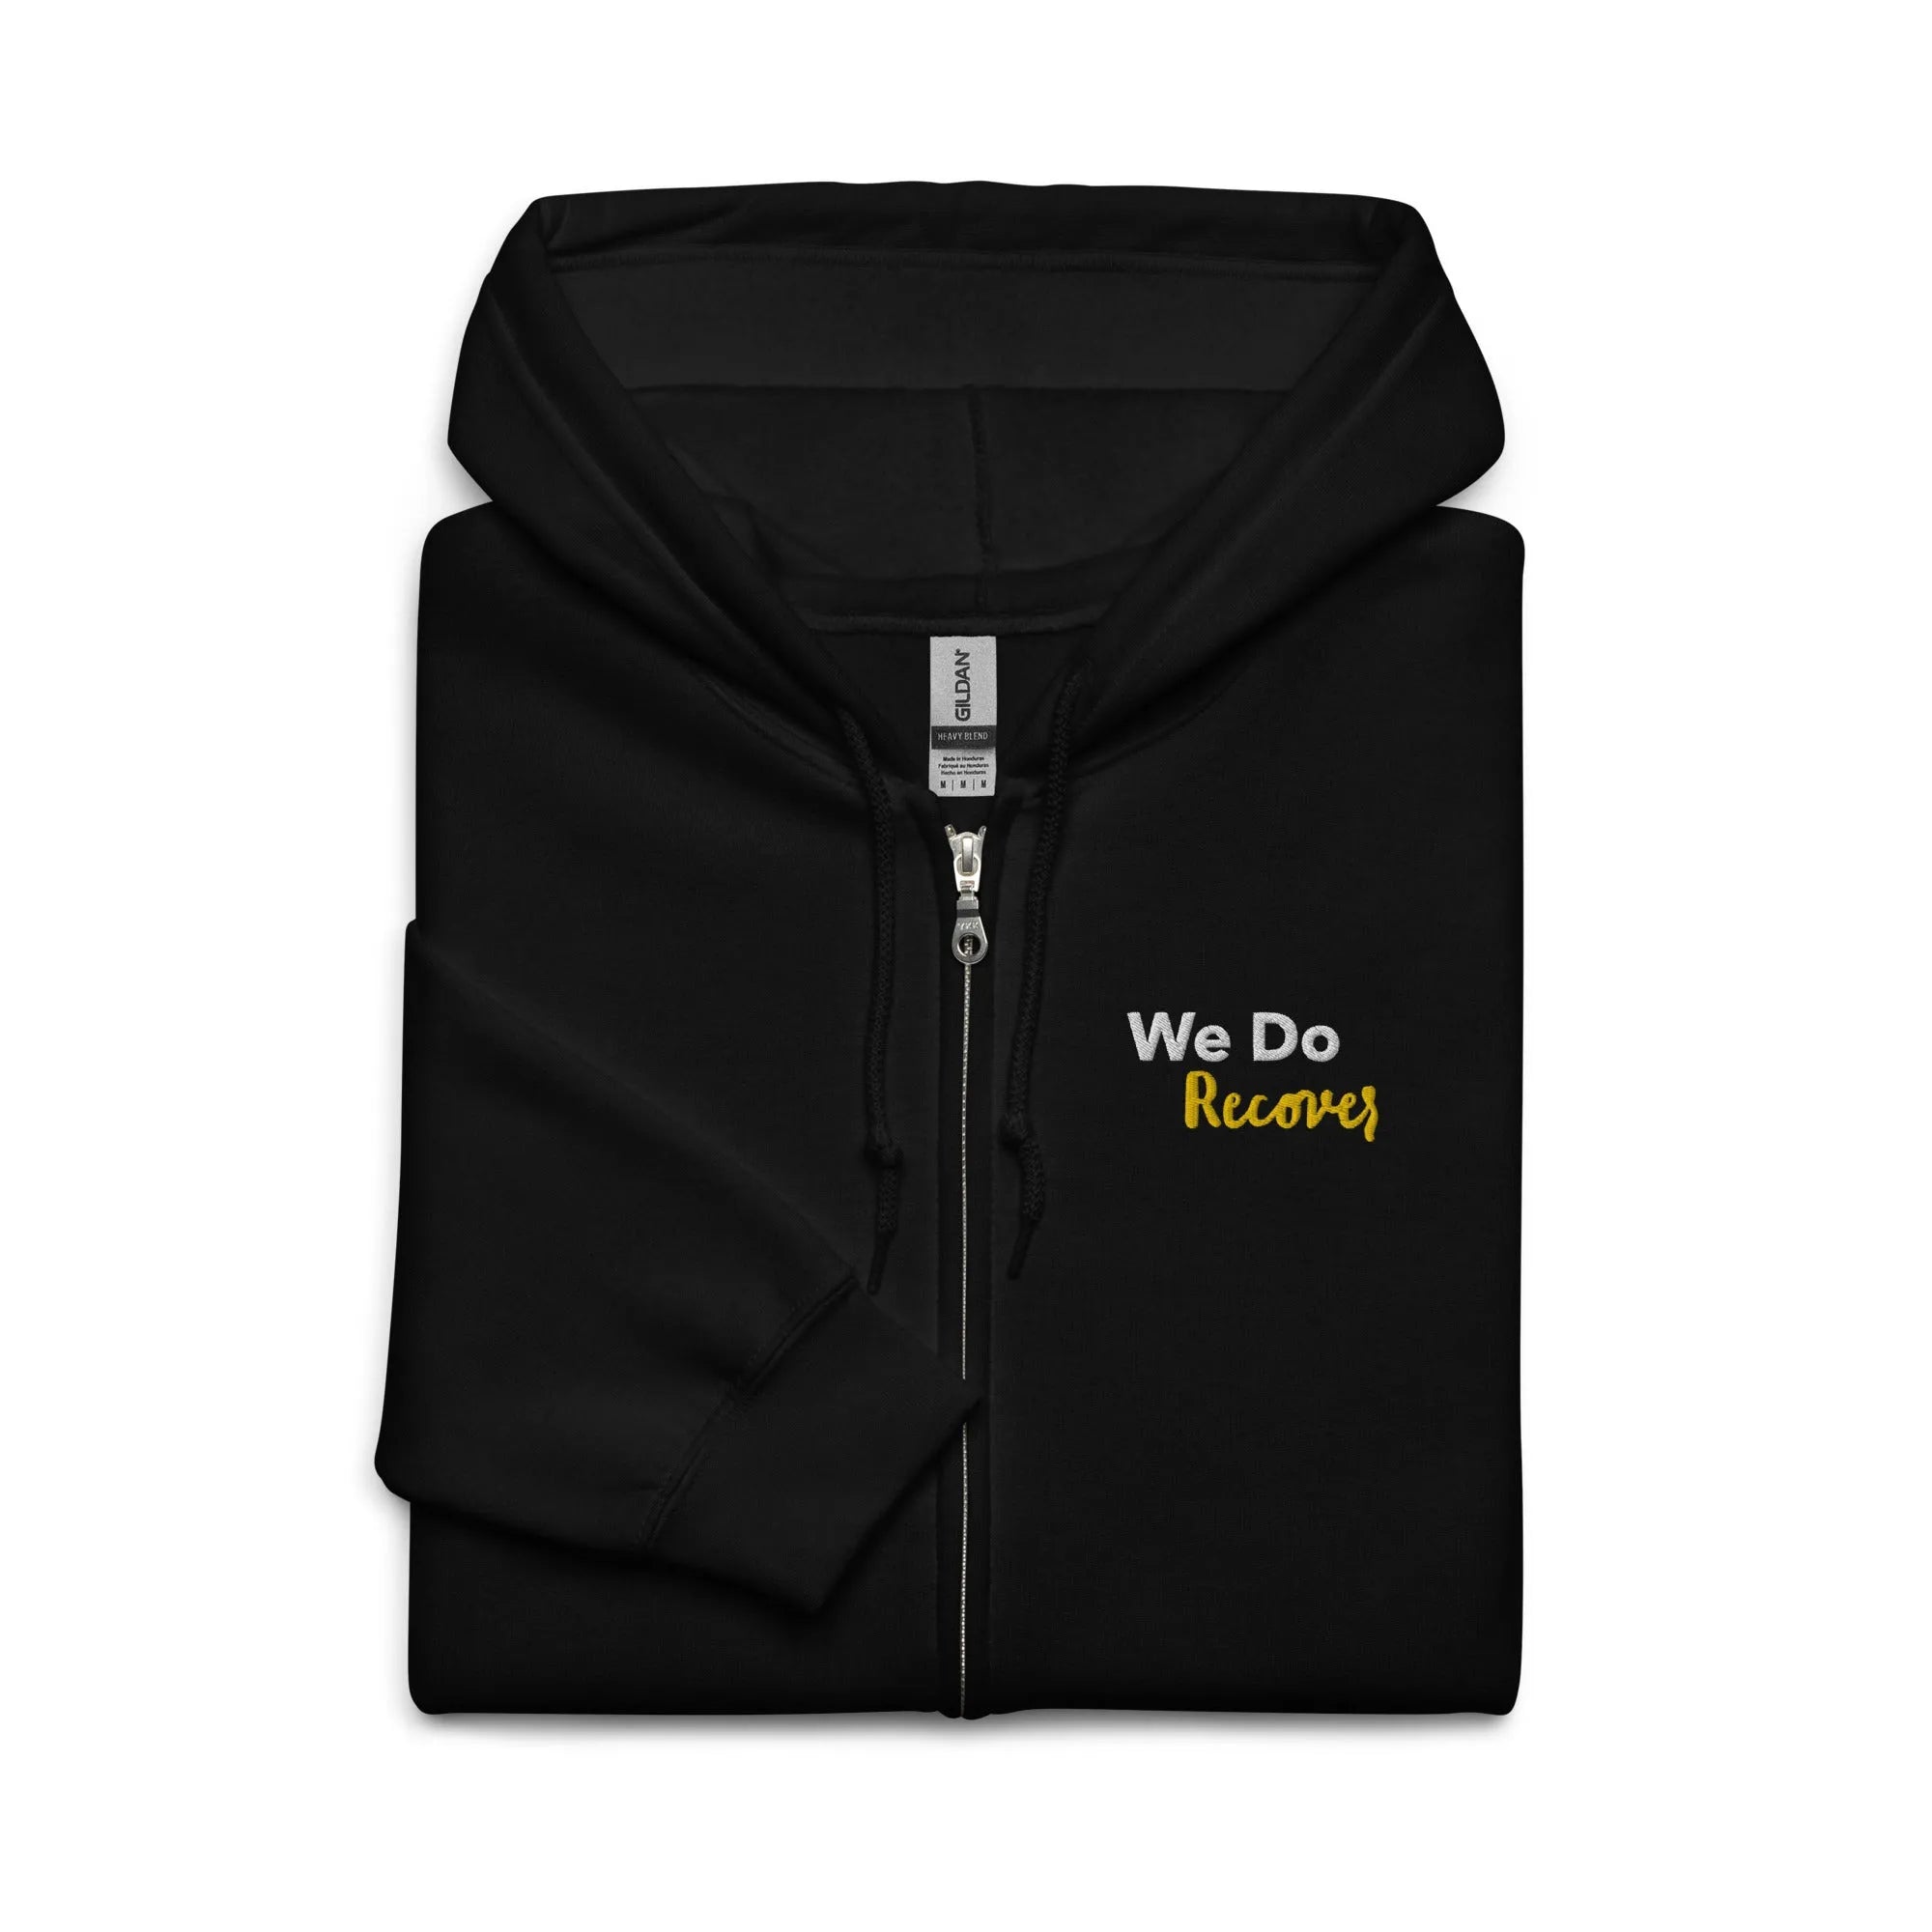 We Do Recover - Embroidered Unisex heavy blend zip hoodie - Sobervation